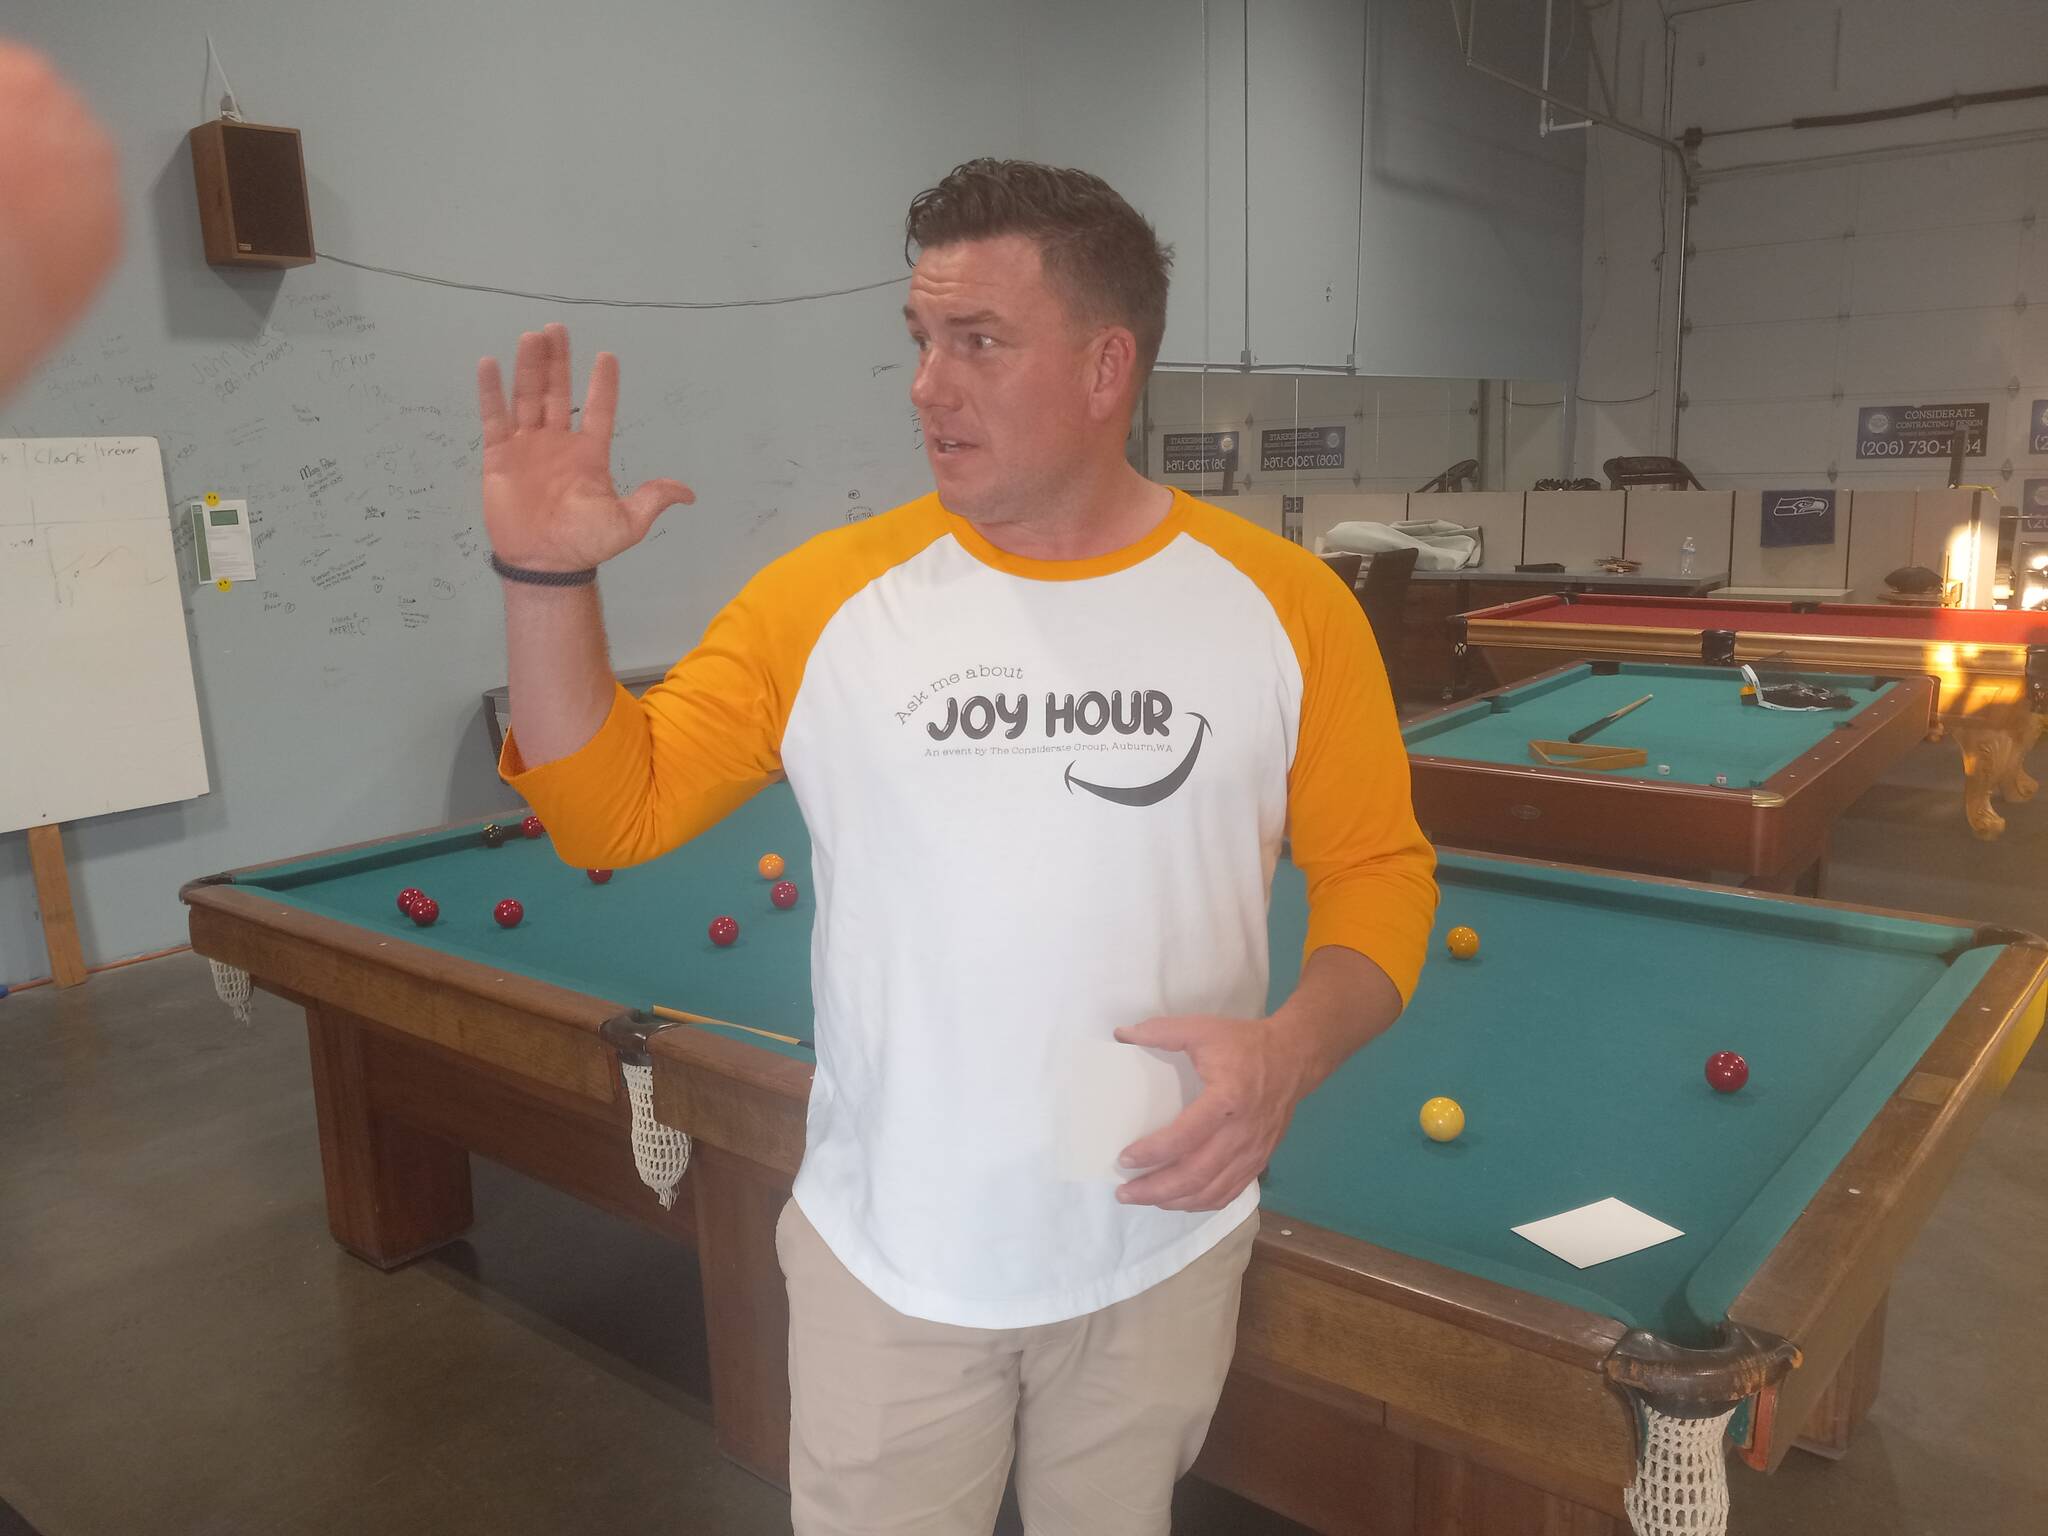 Photo by Robert Whale, Auburn Reporter
Tom Lyman, owner of Considerate Construction in Auburn, founded Joy Hour last March to provide people an opportunity for fun without the need for alcohol, drugs or other addictions.